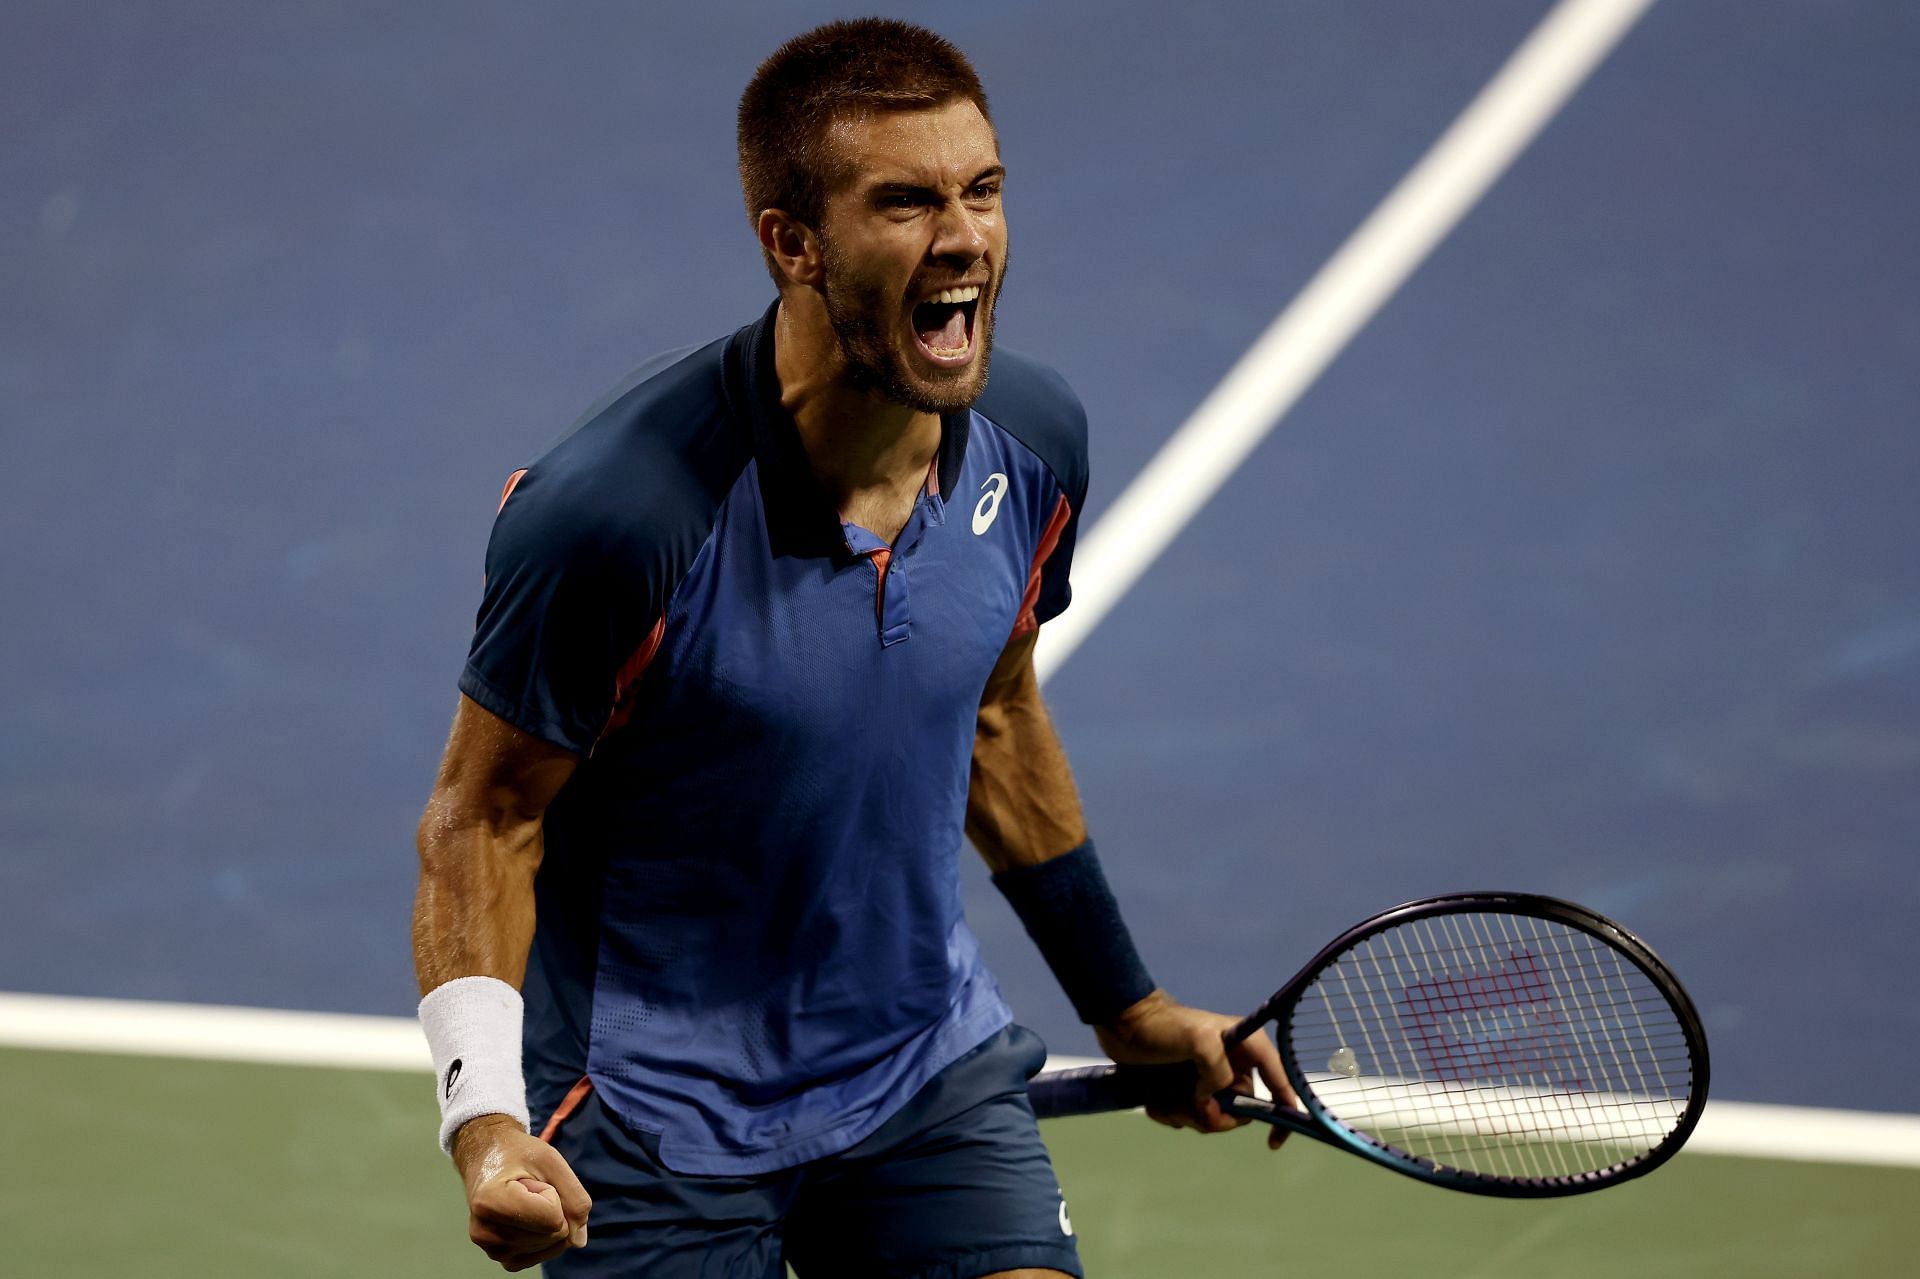 Coric registered wins over Musetti, Nadal, Bautista Agut, Auger Aliassime and Norrie en route to the final